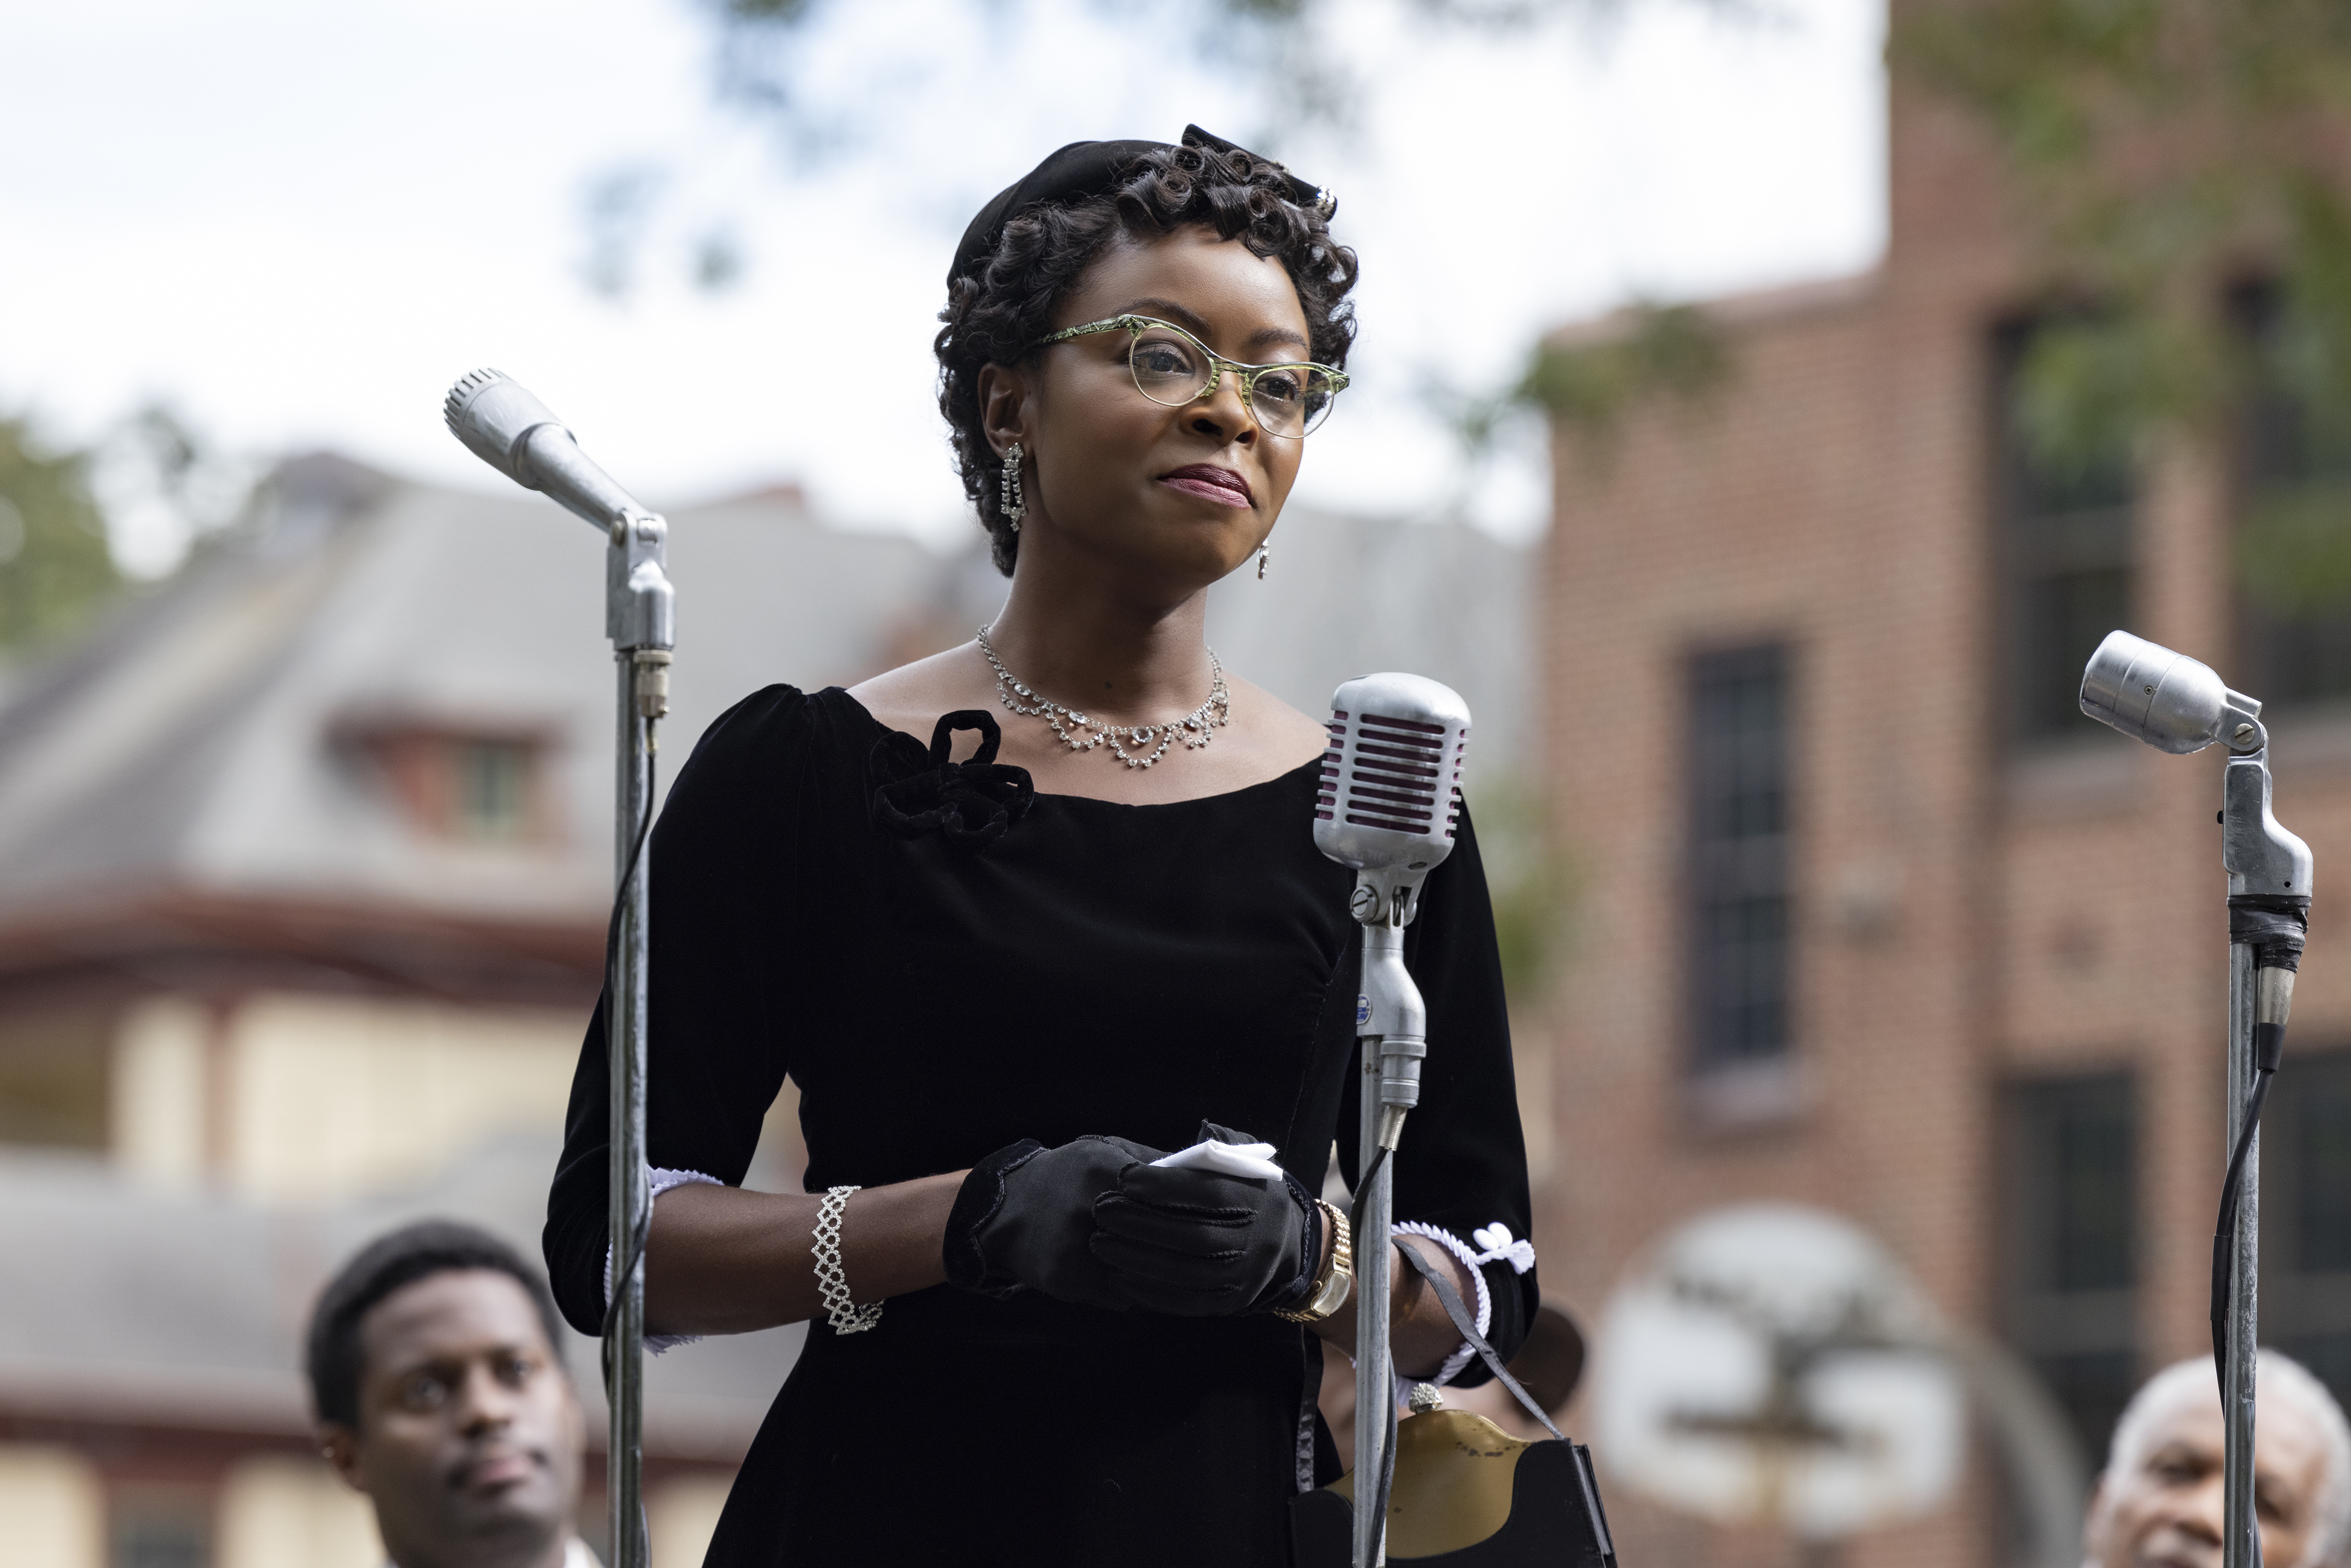 Daniel Deadweiler as Mamie Till Mobley in TILL directed by Chinonye Chukwu.  (Lynsey Weatherspoon—Orion Pictures)